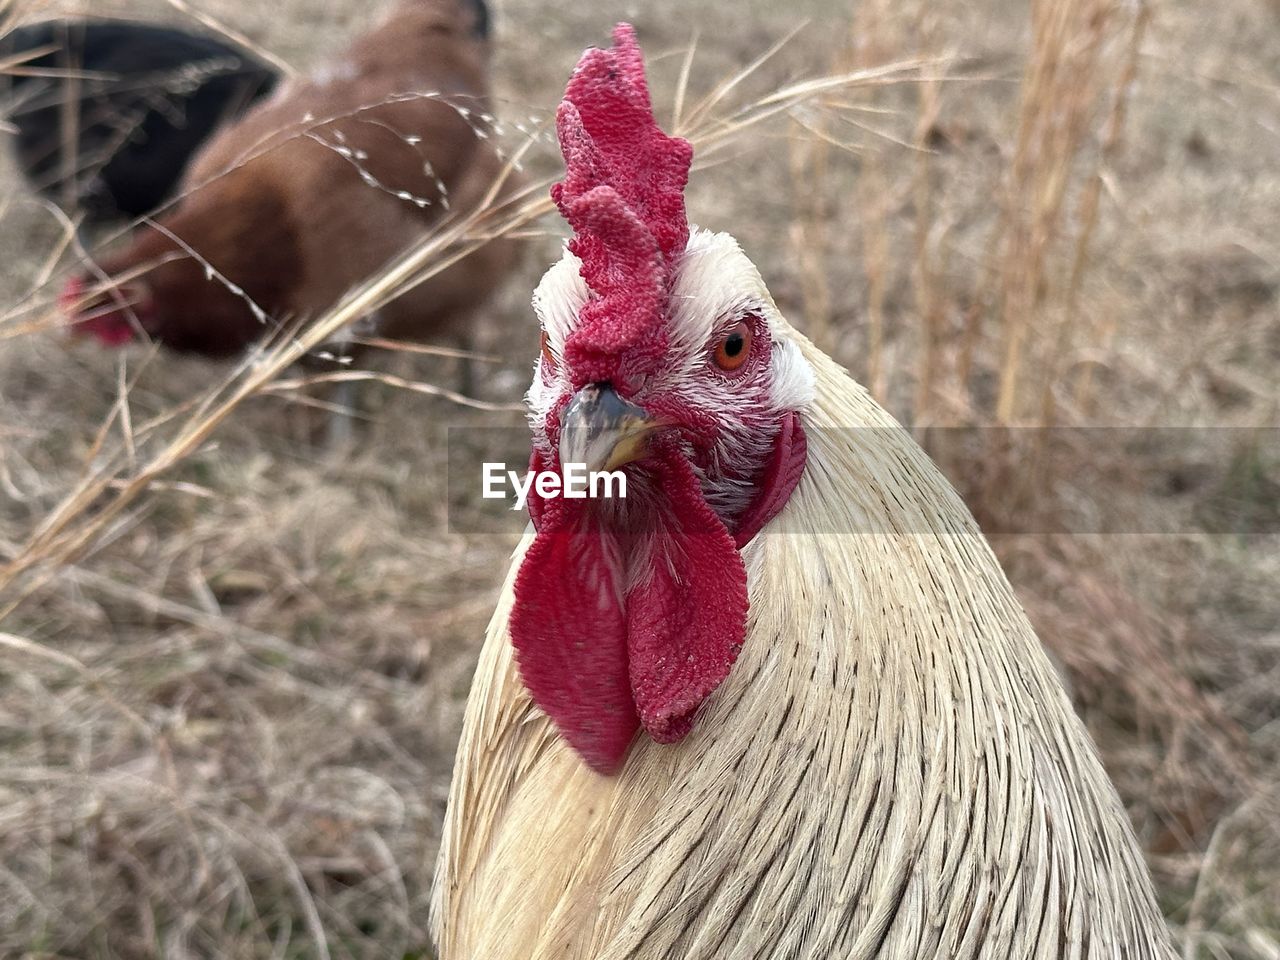 livestock, domestic animals, animal themes, animal, chicken, bird, rooster, pet, mammal, agriculture, fowl, comb, one animal, poultry, cockerel, beak, nature, no people, farm, focus on foreground, close-up, day, outdoors, red, rural scene, animal body part